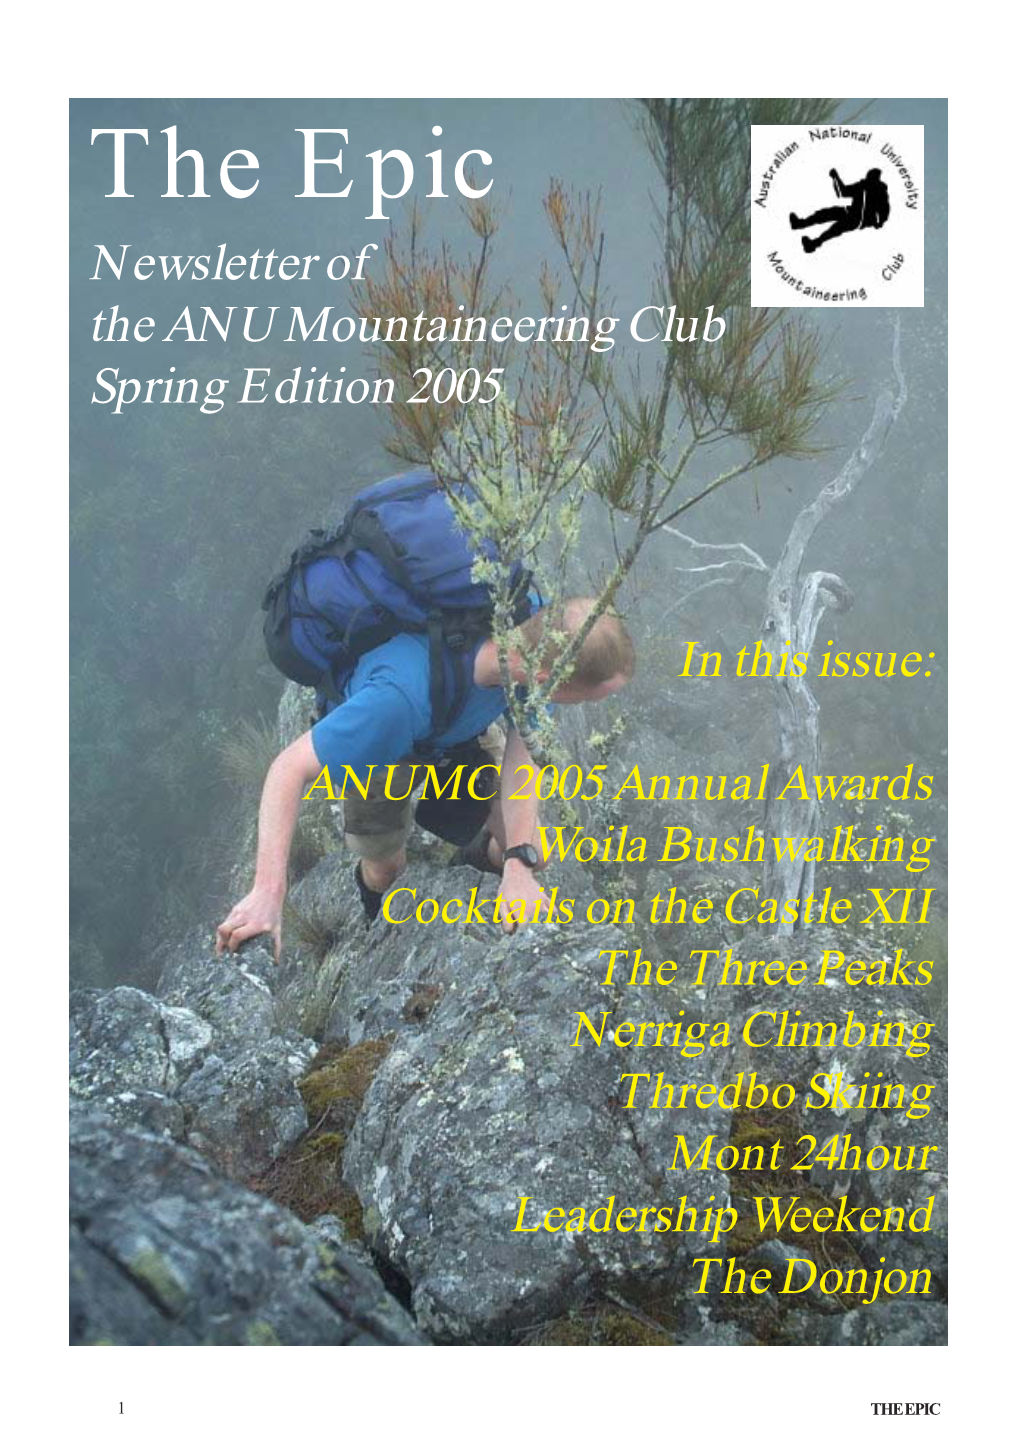 The Epic Newsletter of the ANU Mountaineering Club Spring Edition 2005